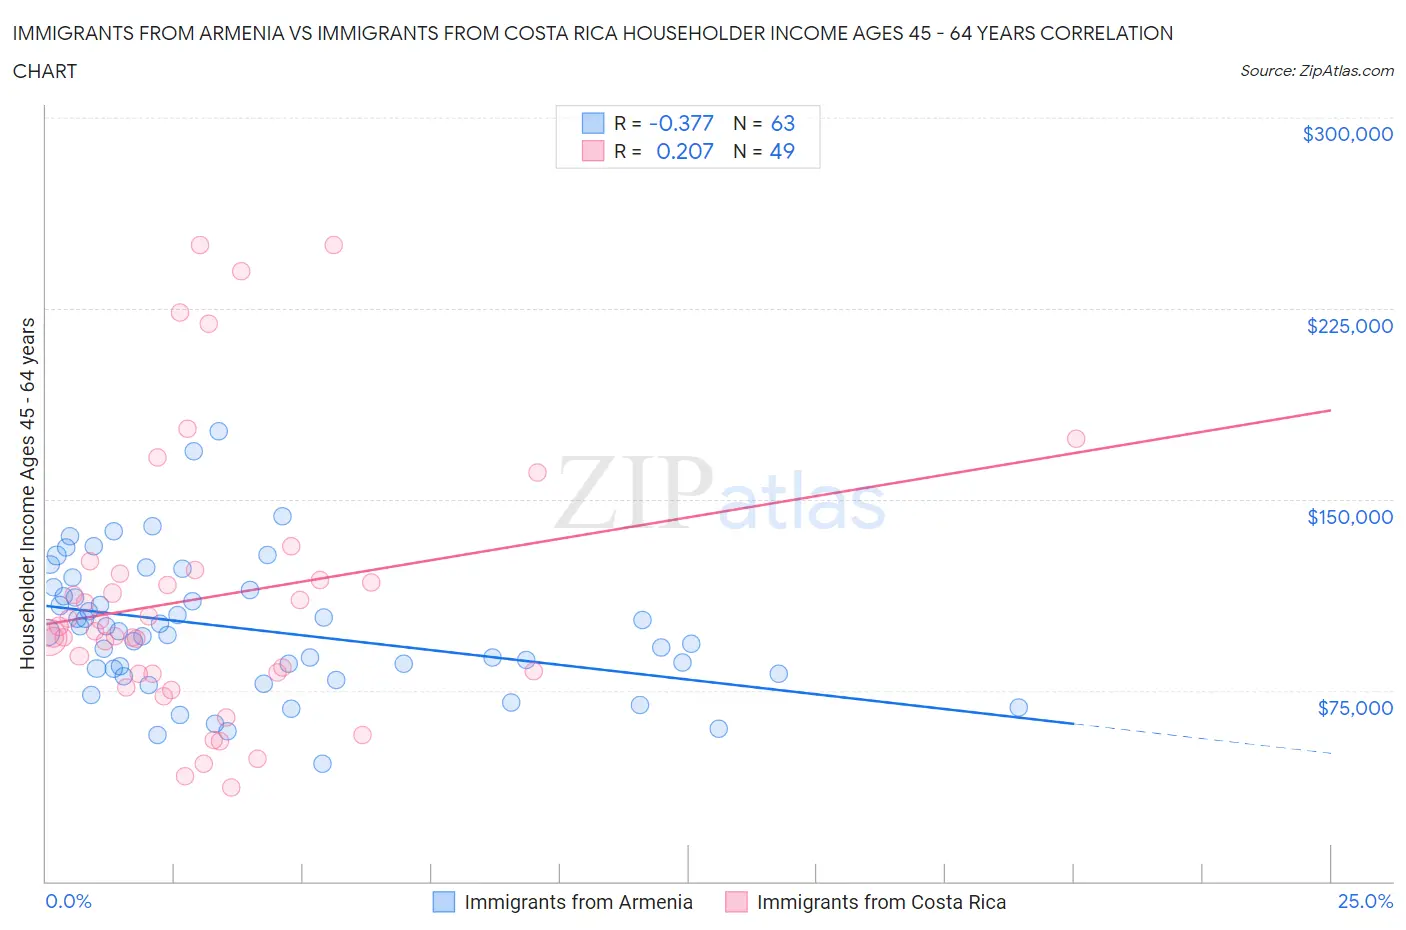 Immigrants from Armenia vs Immigrants from Costa Rica Householder Income Ages 45 - 64 years